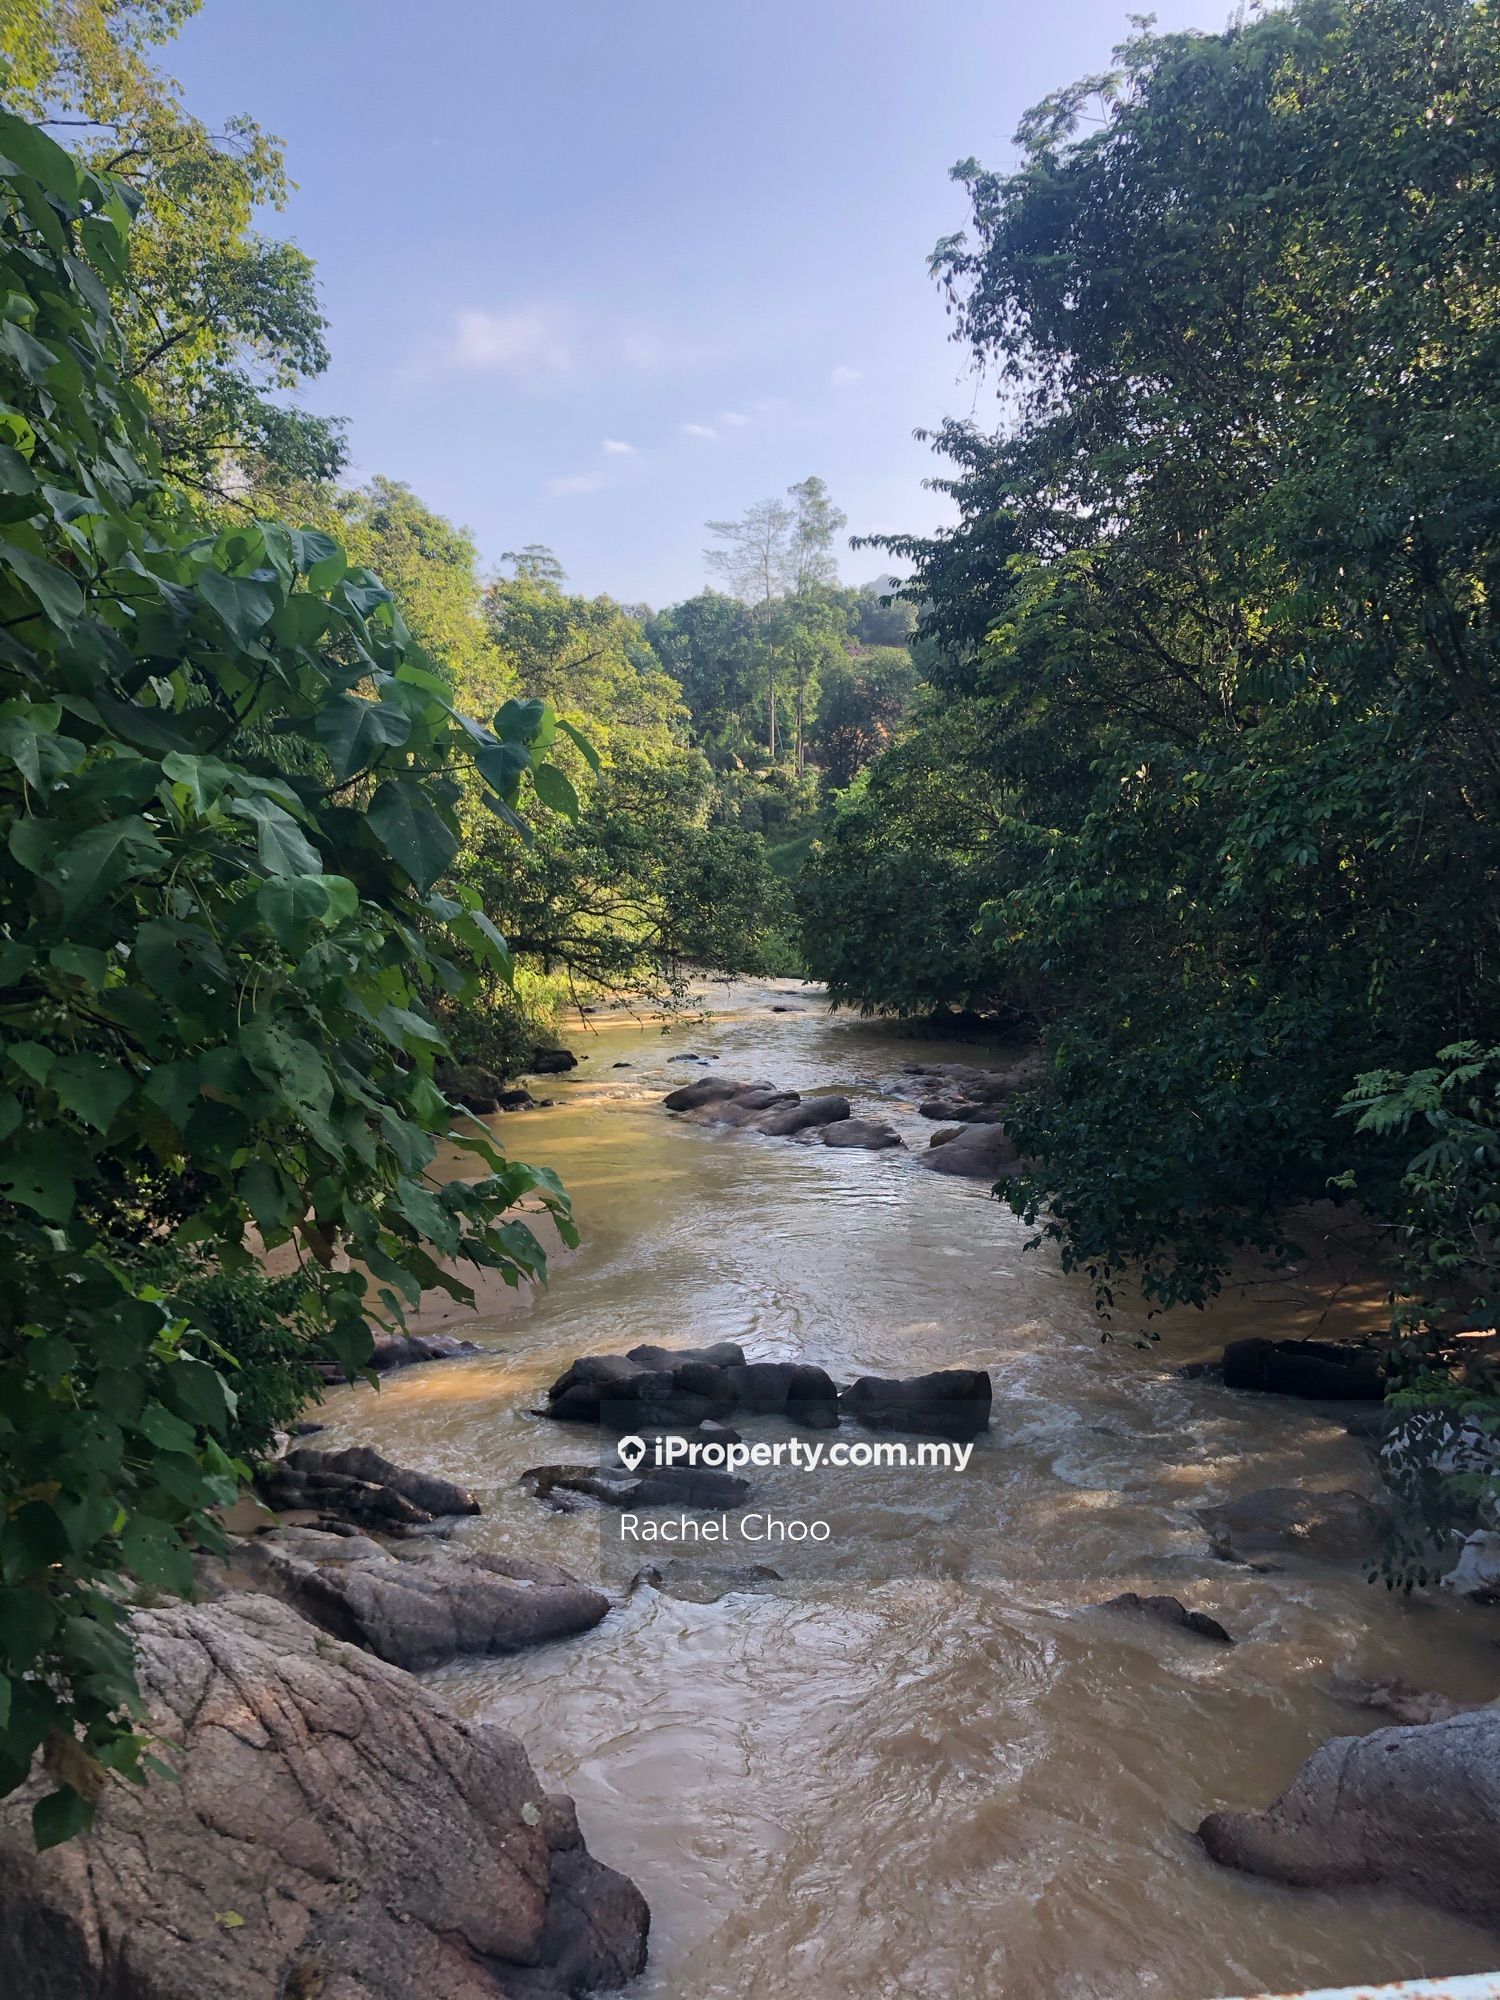 Hot Spring Agricultural Land for sale in Ipoh, Perak | iProperty.com.my